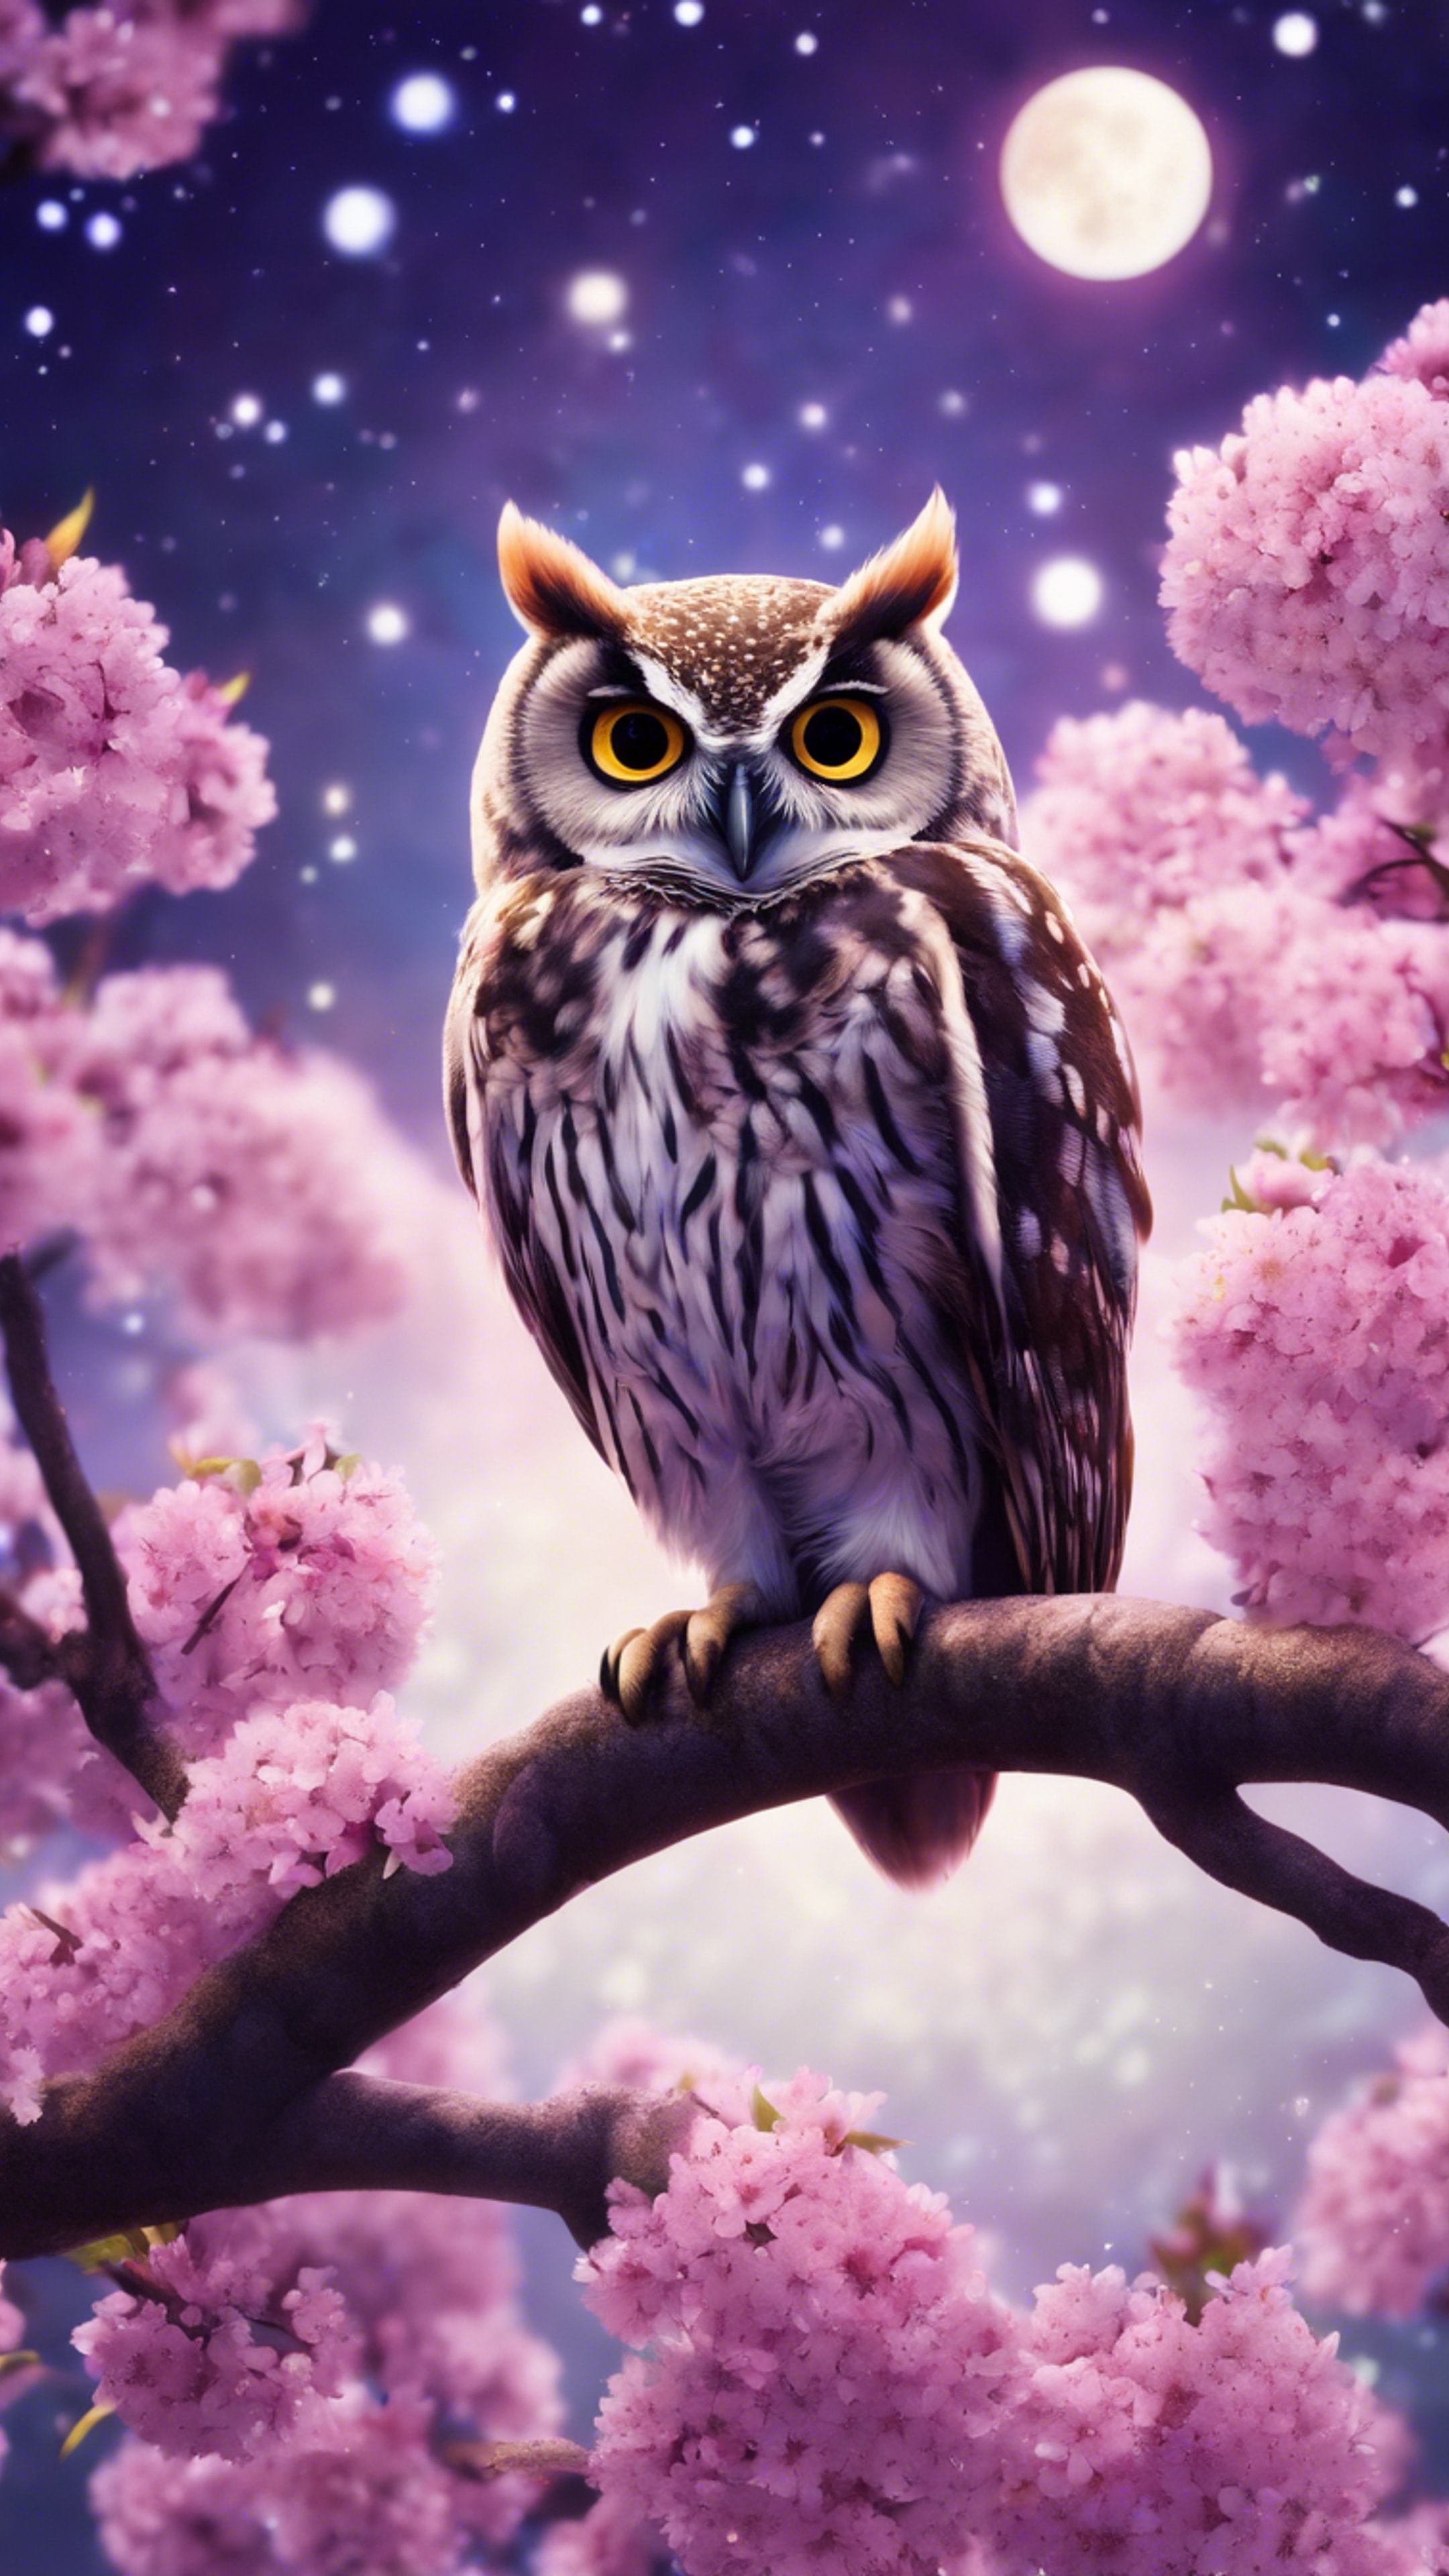 A cute kawaii style owl perched on a cherry blossom tree that blooms vibrant purple flowers, under a moonlit starry night. Обои[d4c437875b7e43ac9353]